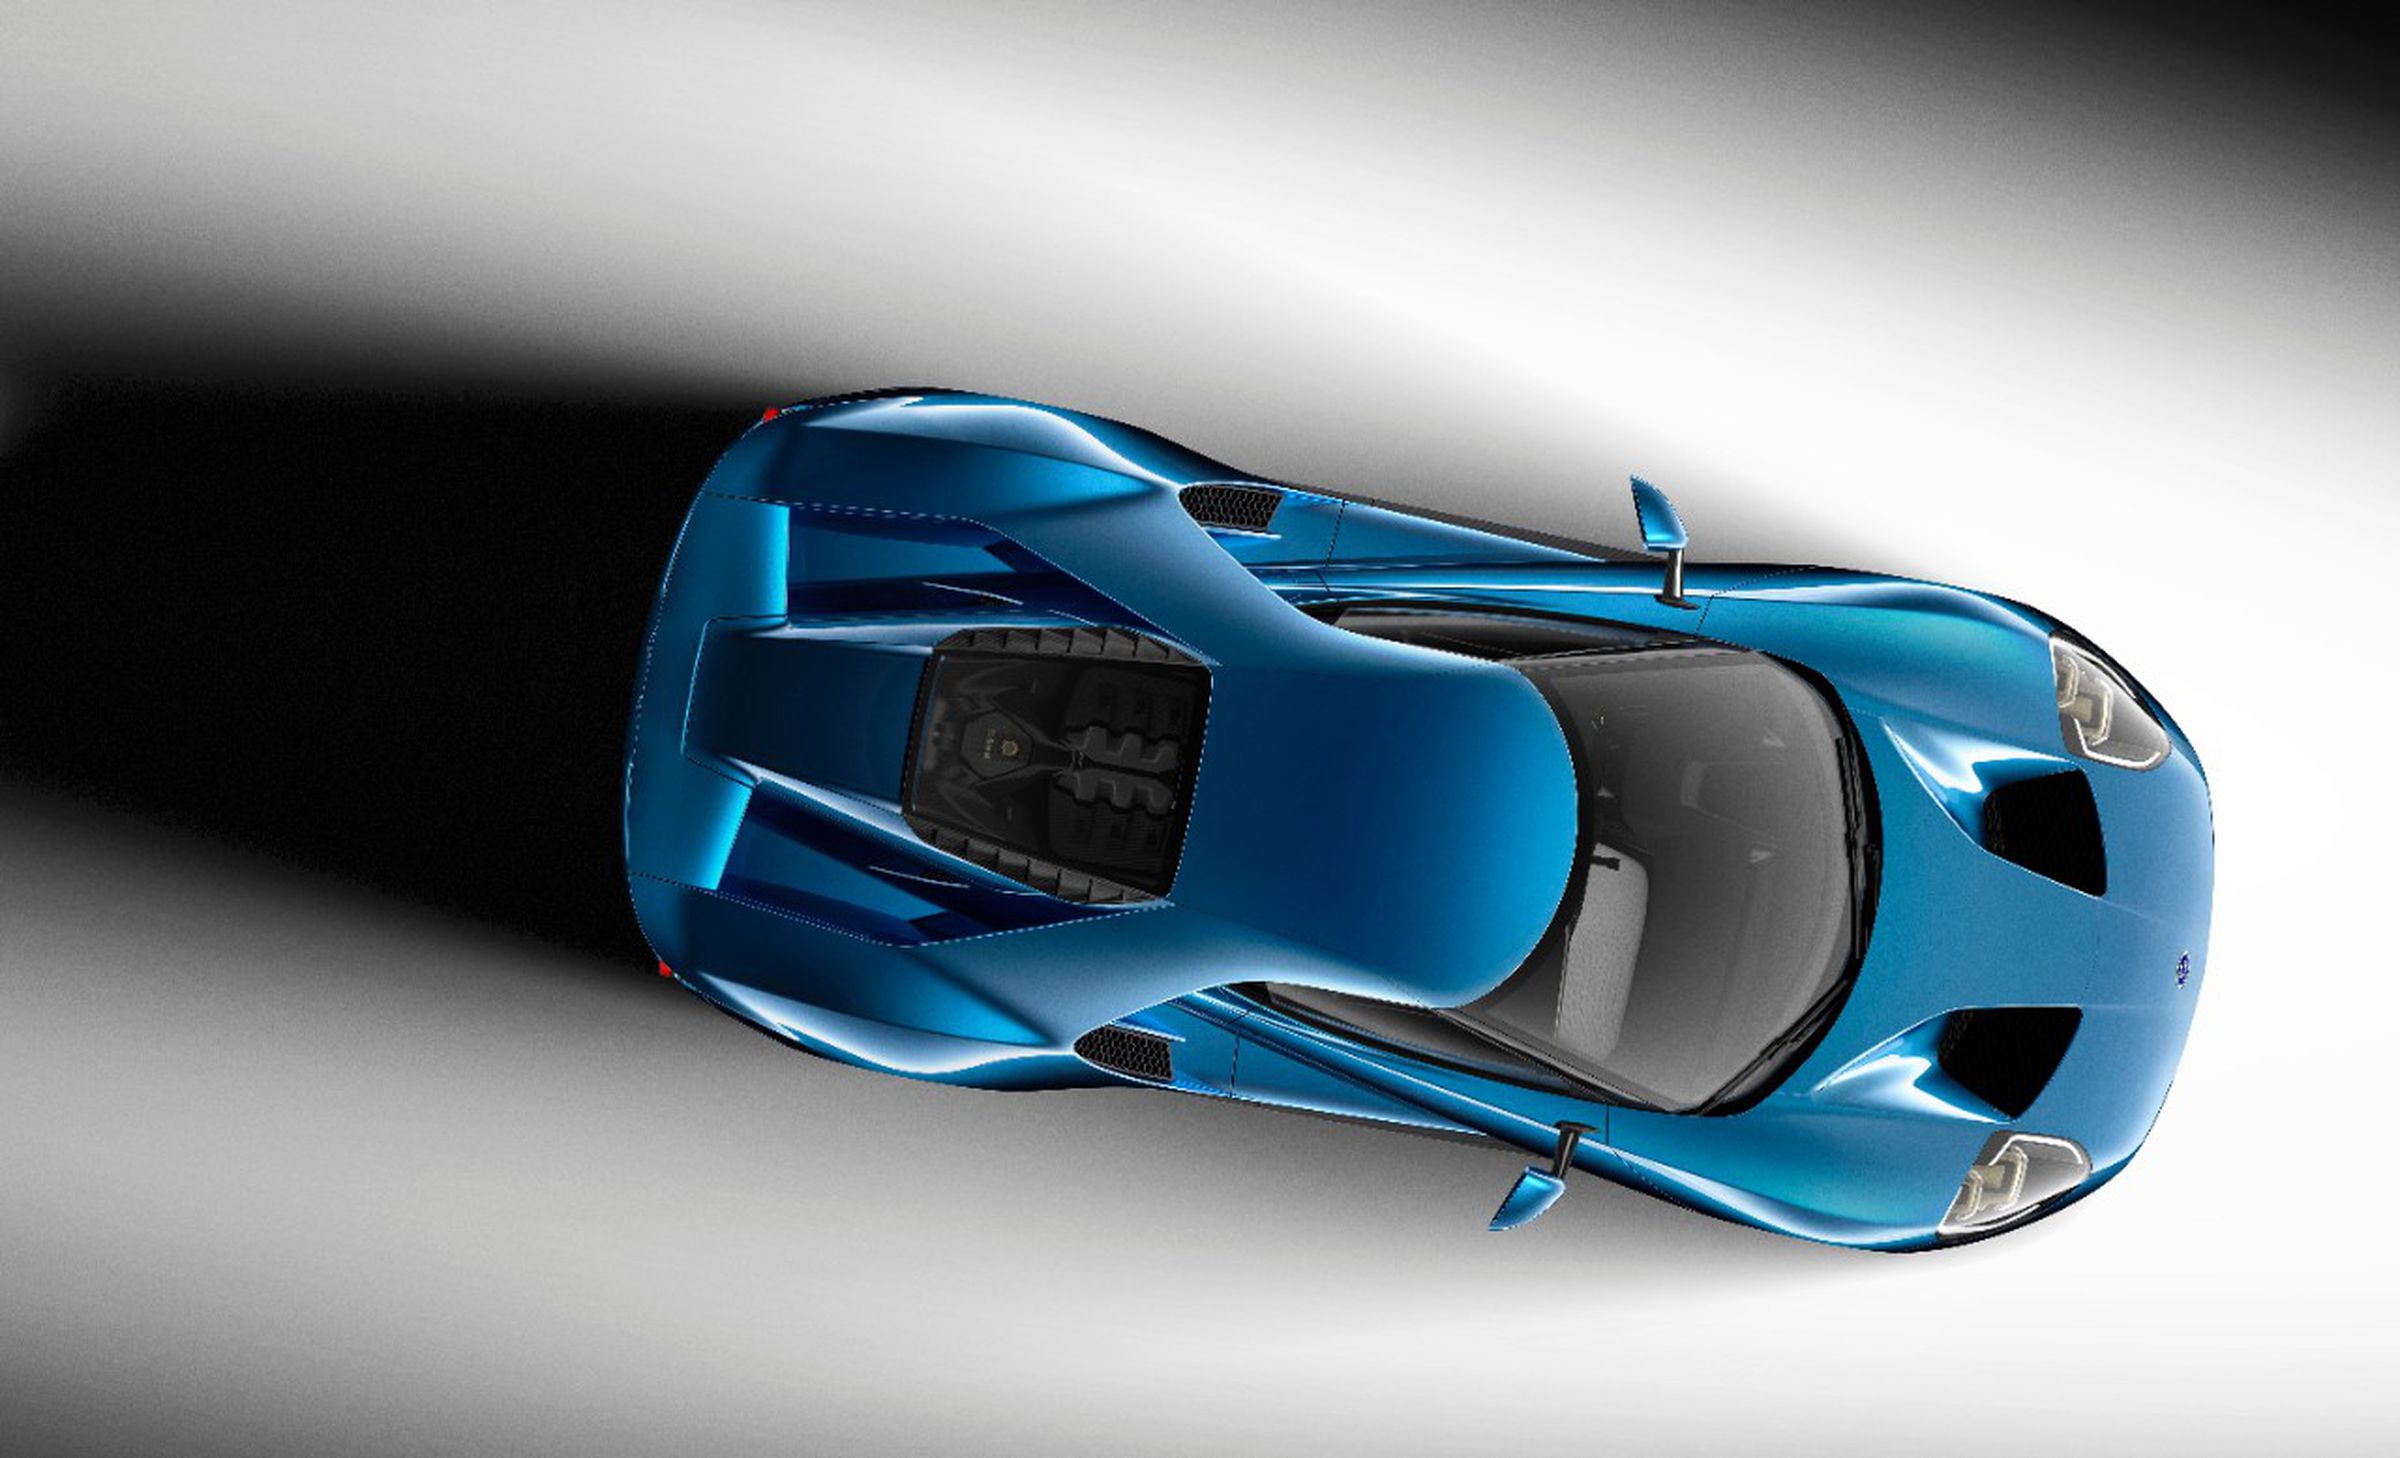 New 2016 Ford GT in photos